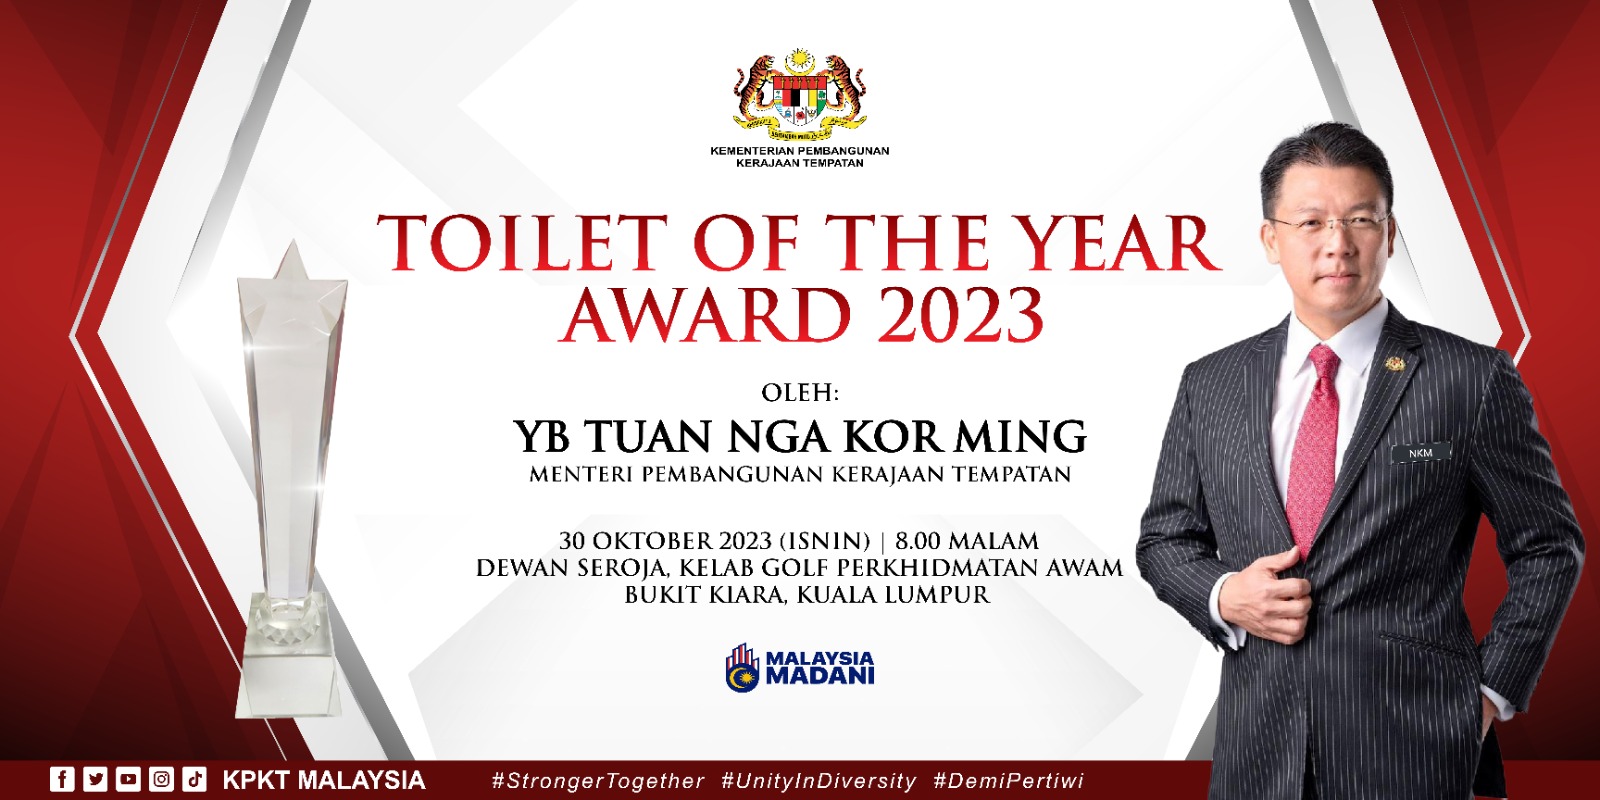 Announcement of toilet of the year 2023 award